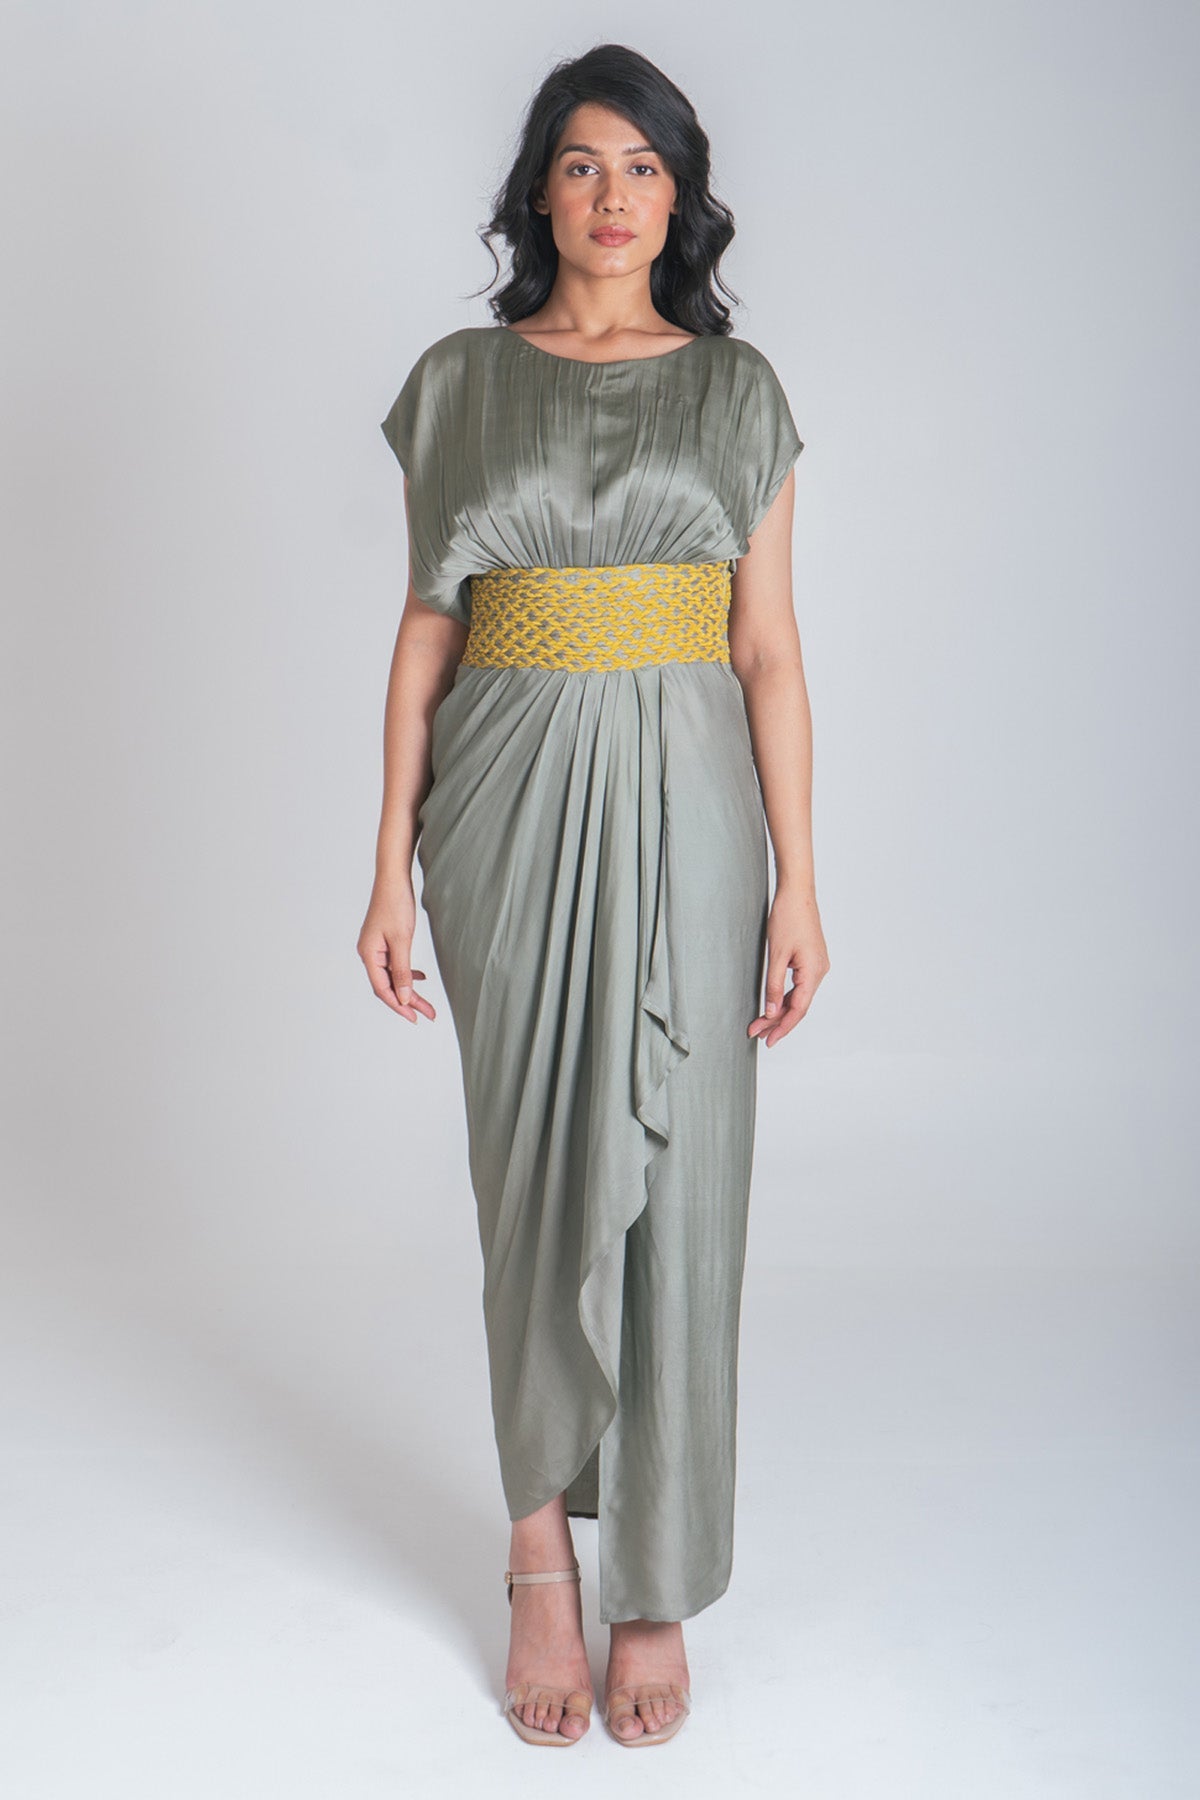 Neora by Nehal Chopra Green And Yellow Braided Gown for women online at ScrollnShops